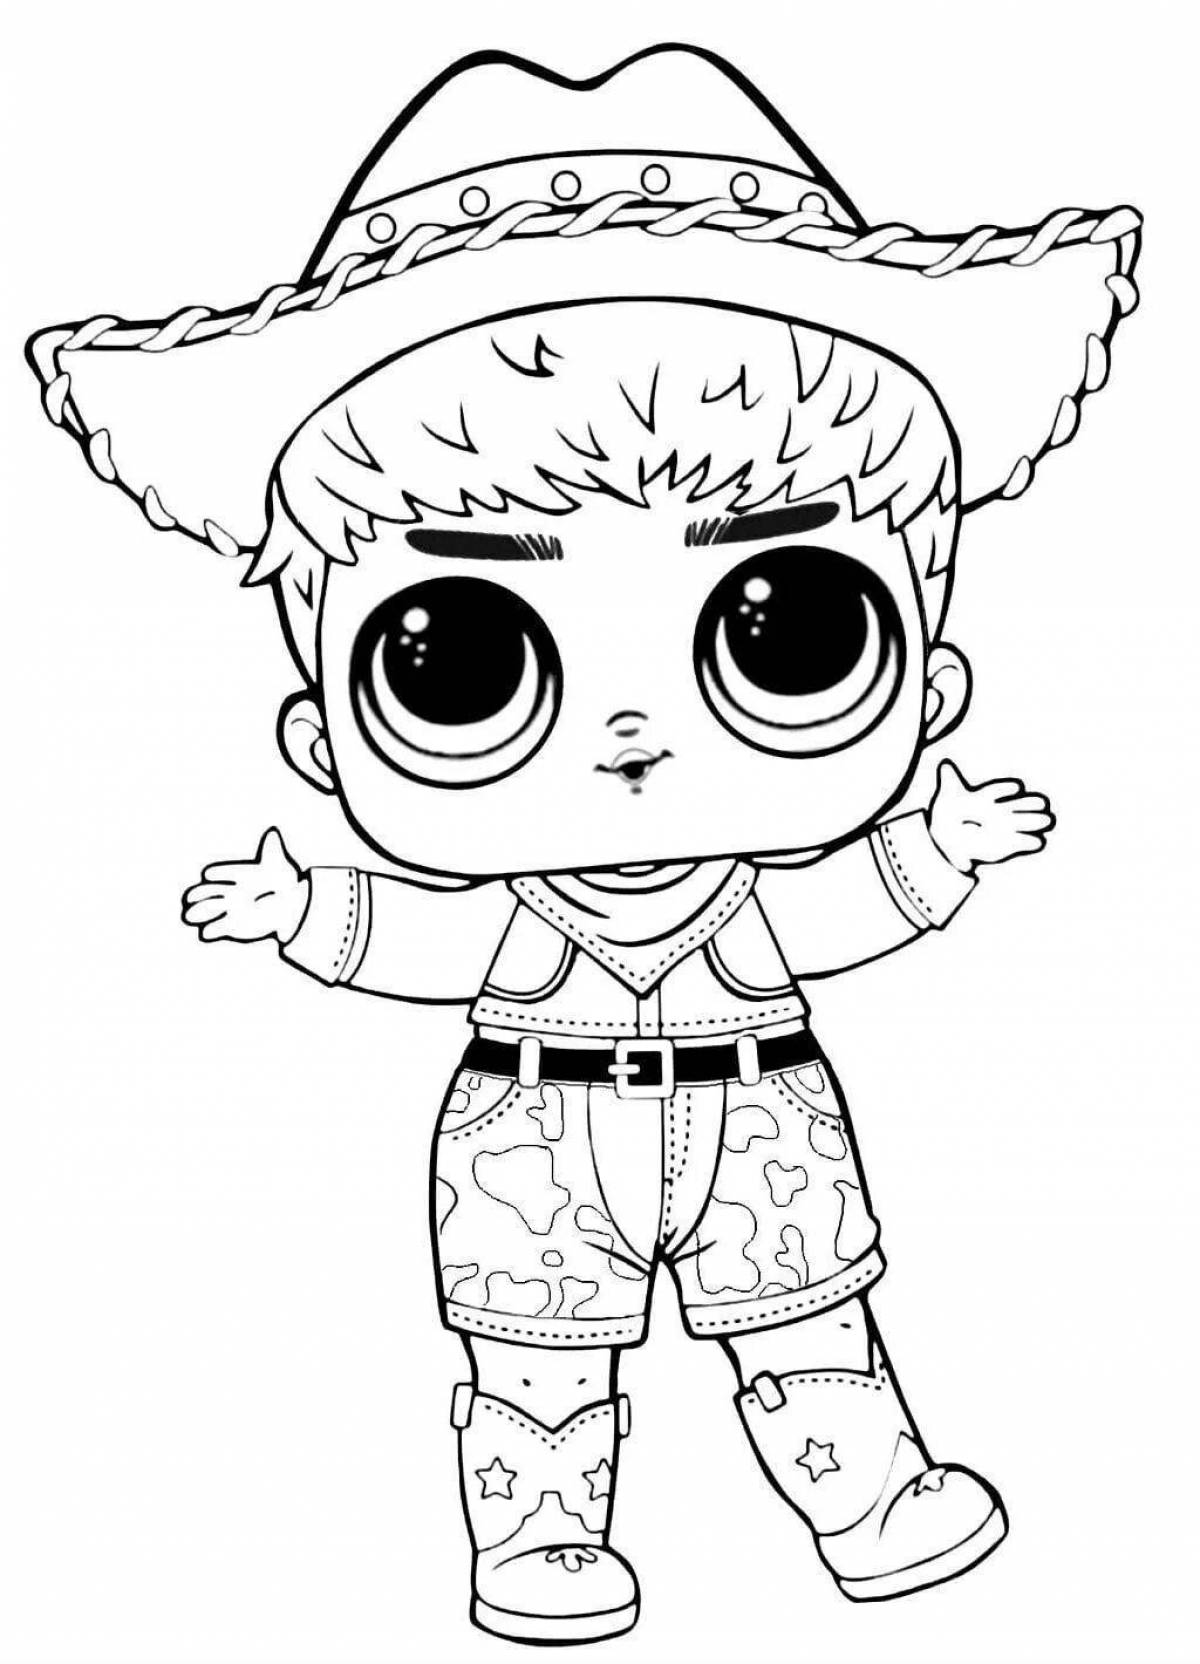 Coloring page adorable puppet boy